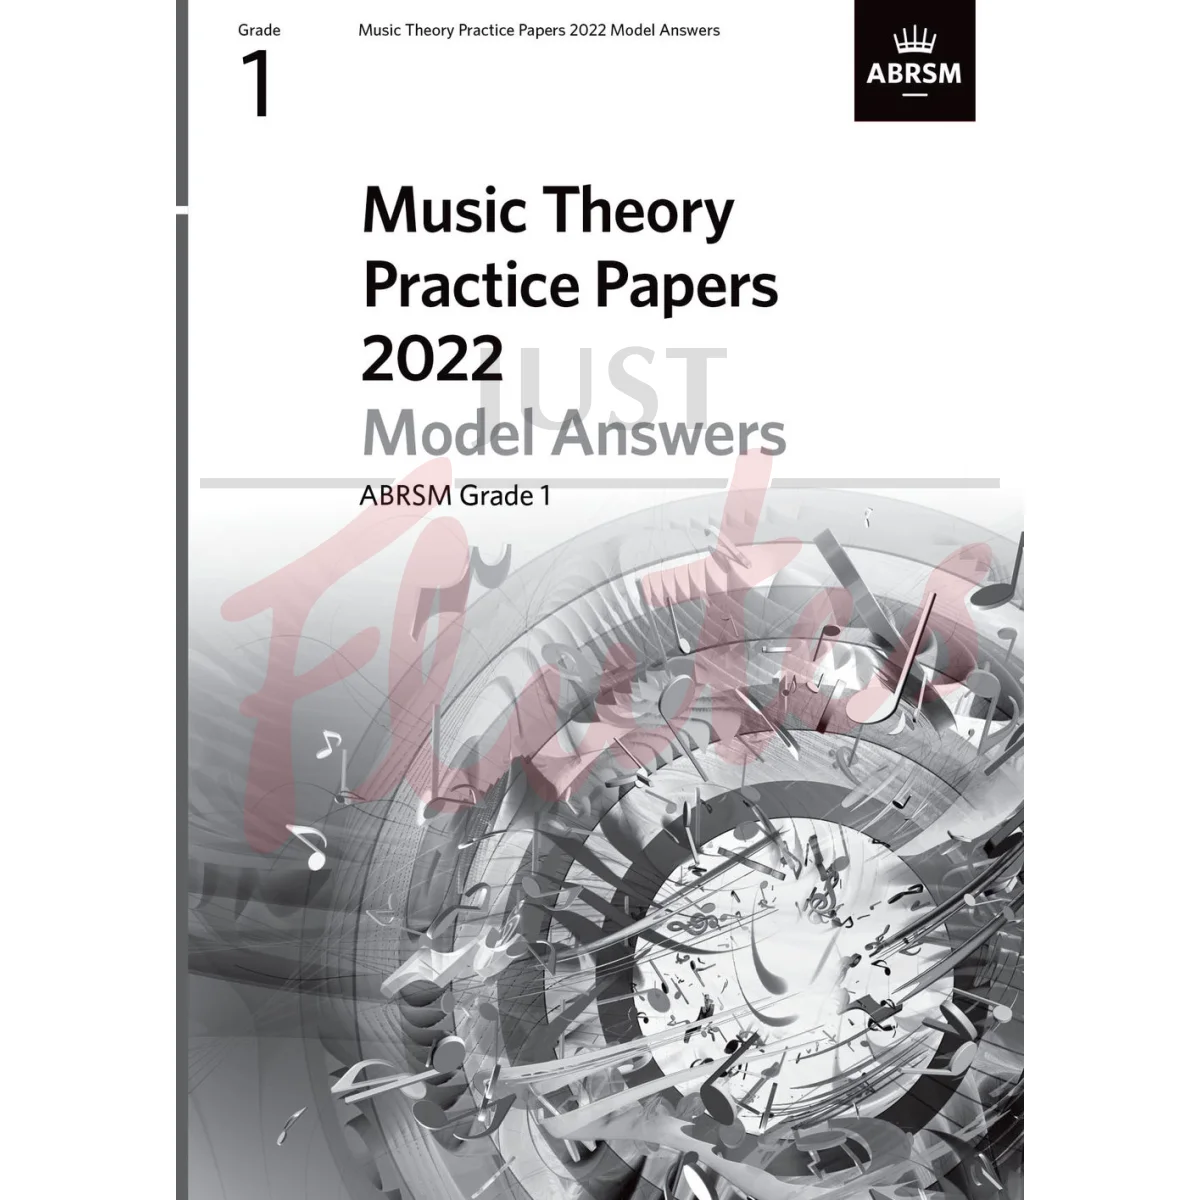 Music Theory Practice Papers 2022 Grade 1 - Model Answers